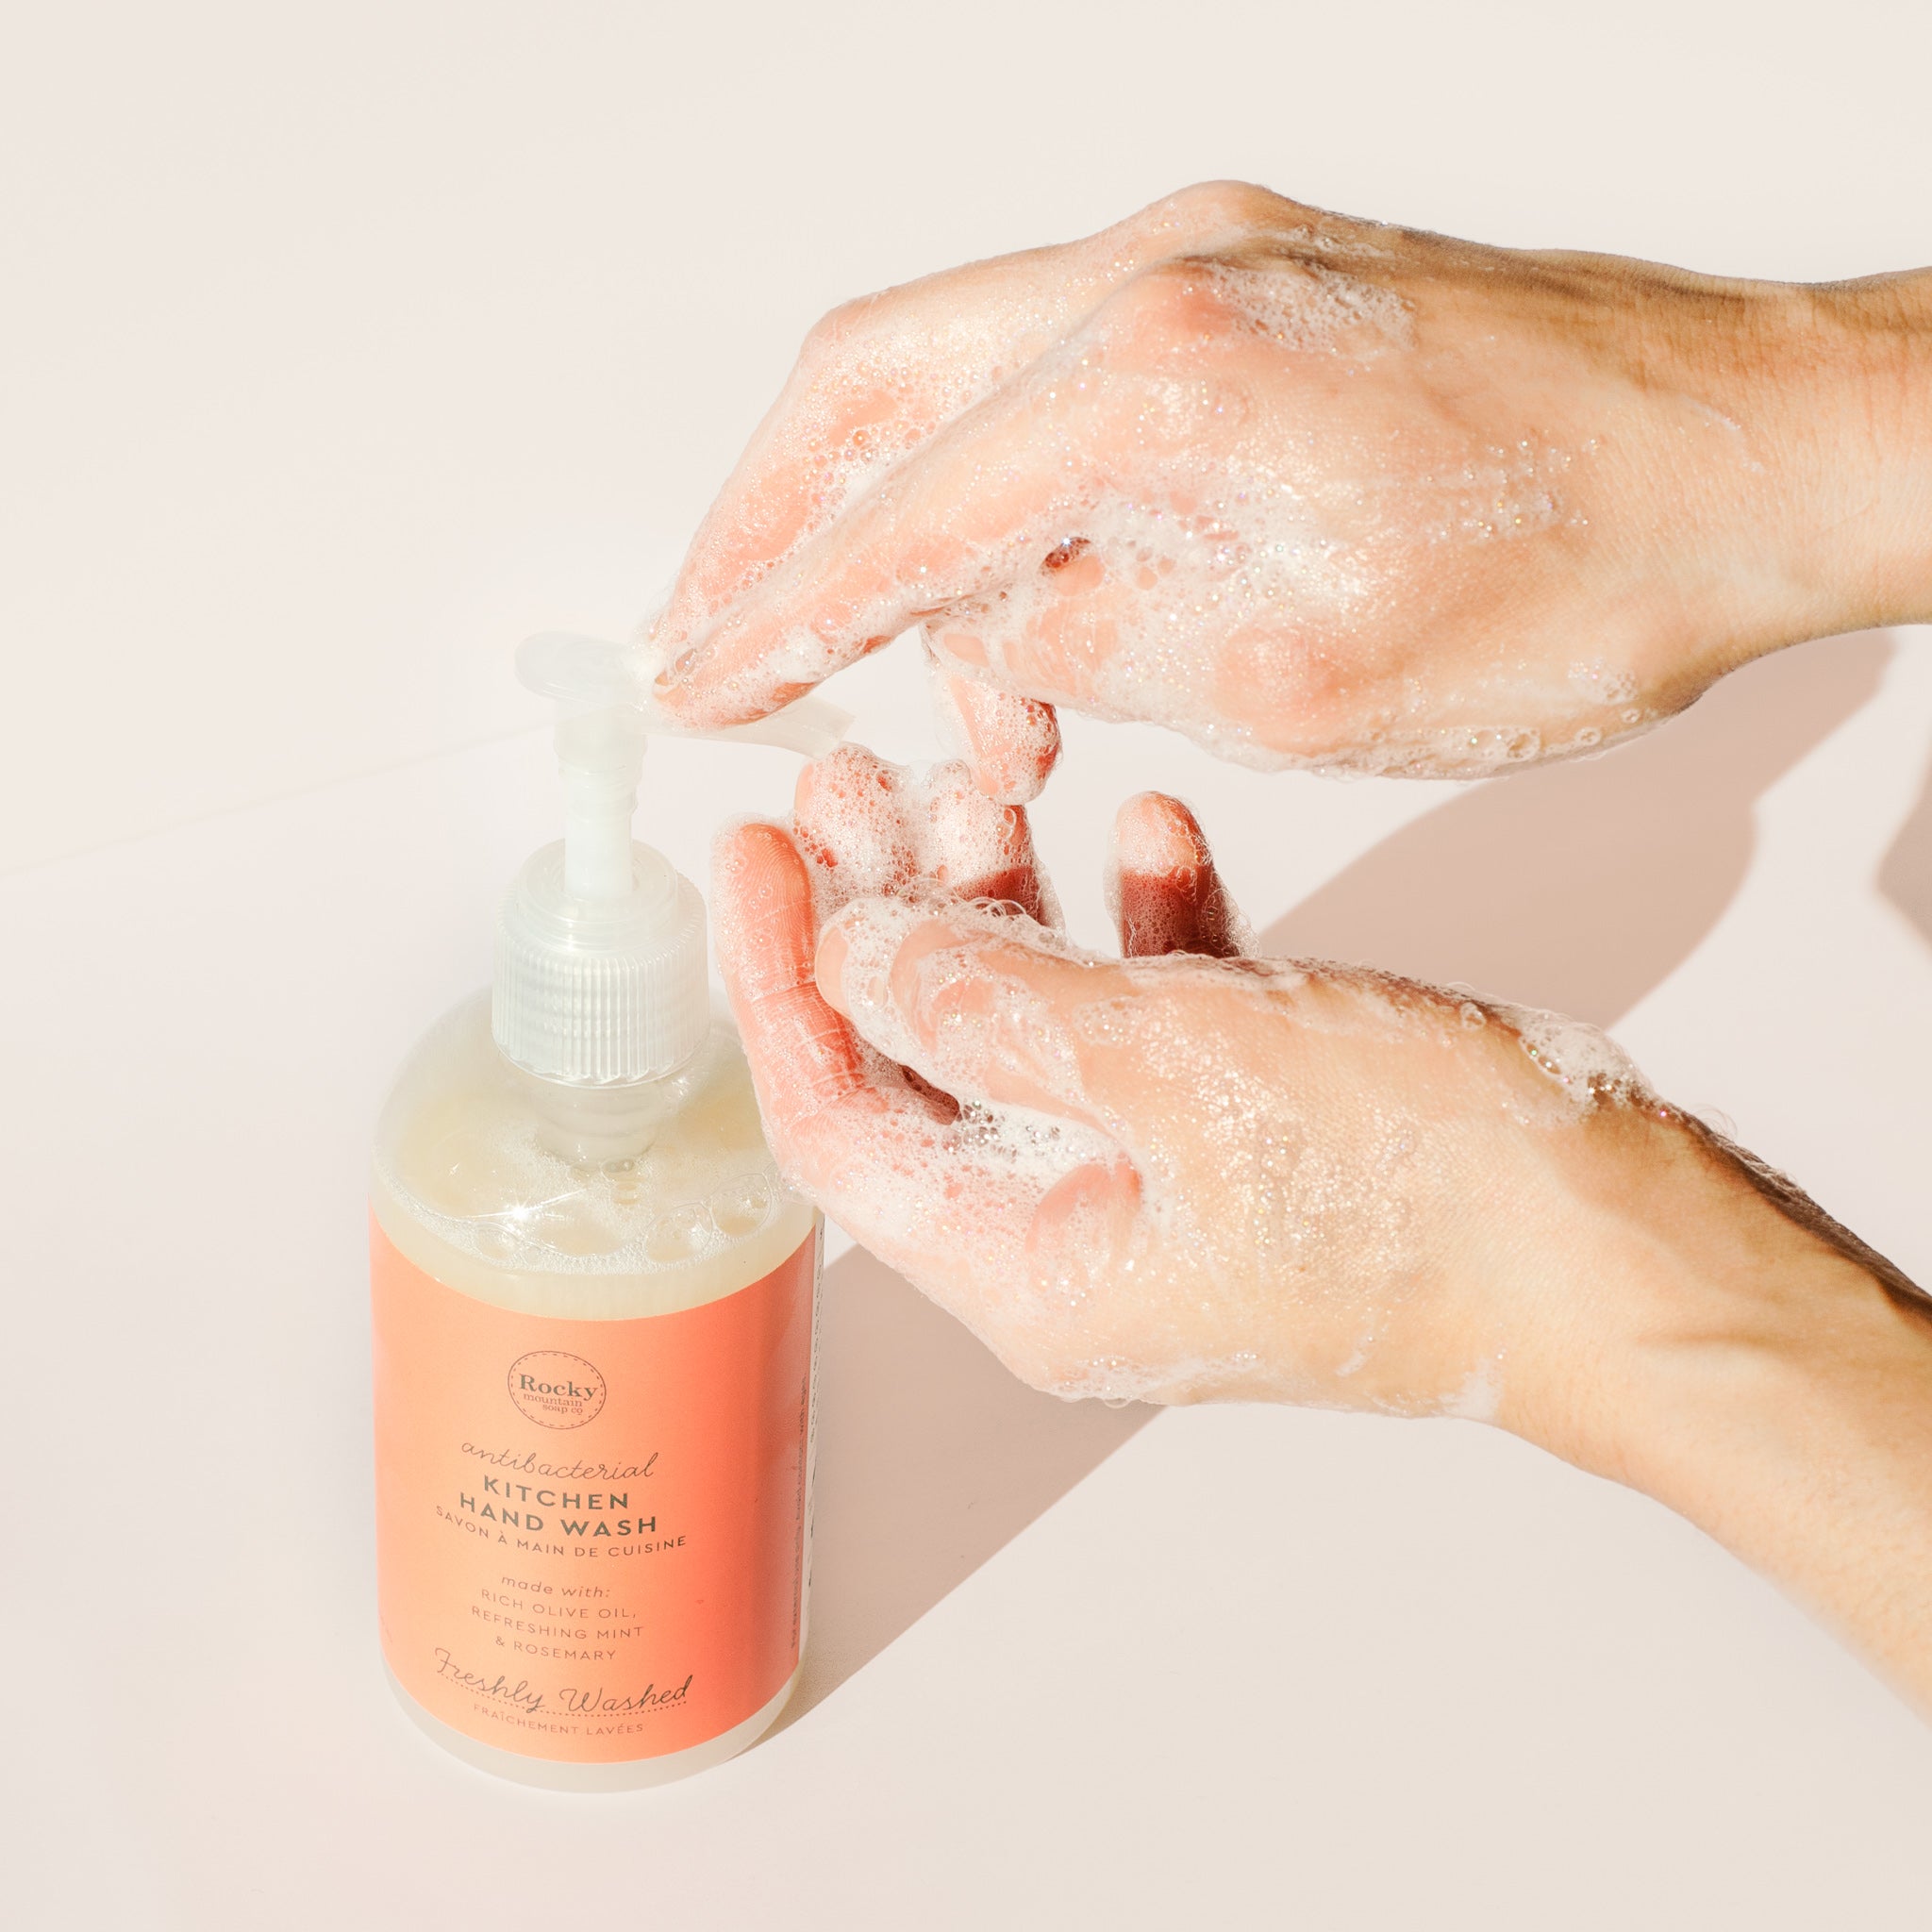 Image of hands washing with lather pumping antibacterial liquid soap from Rocky Mountain Soap Campany Kitchen Hand Wash.  